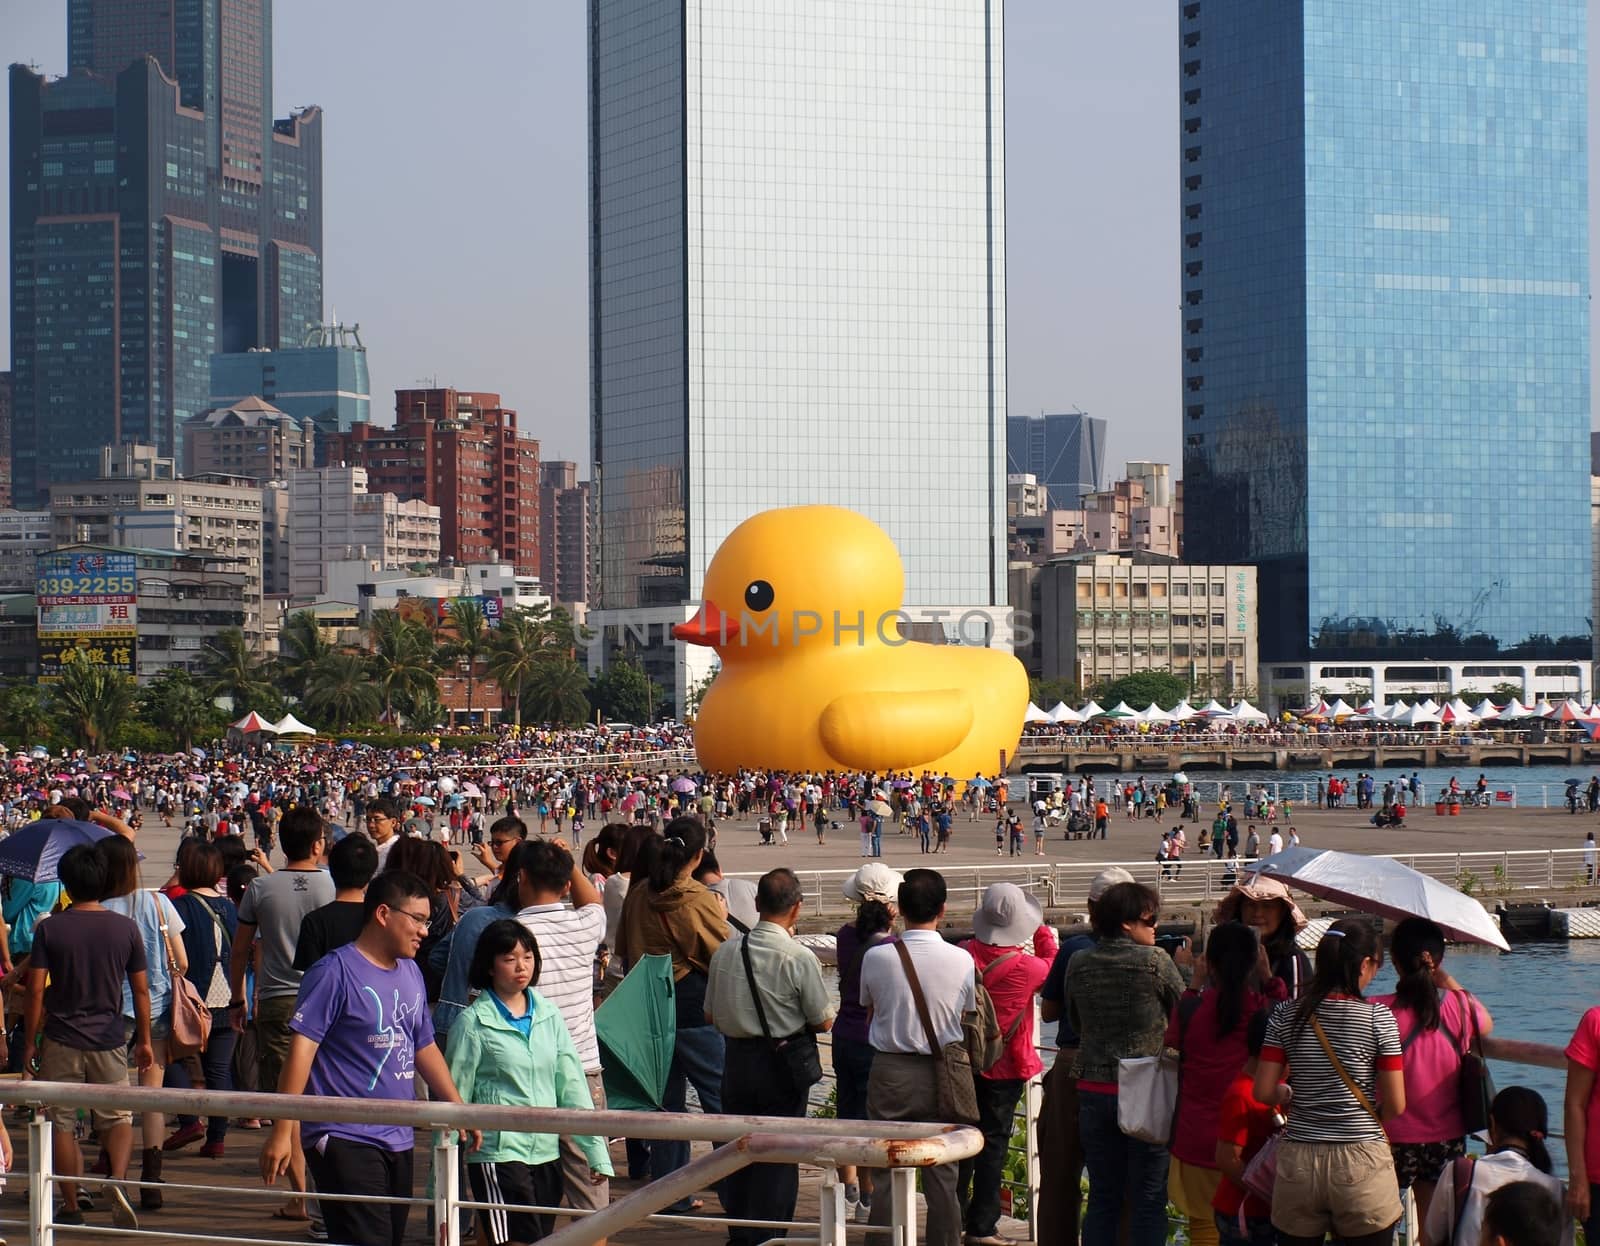 Giant Rubber Duck Visits Taiwan by shiyali